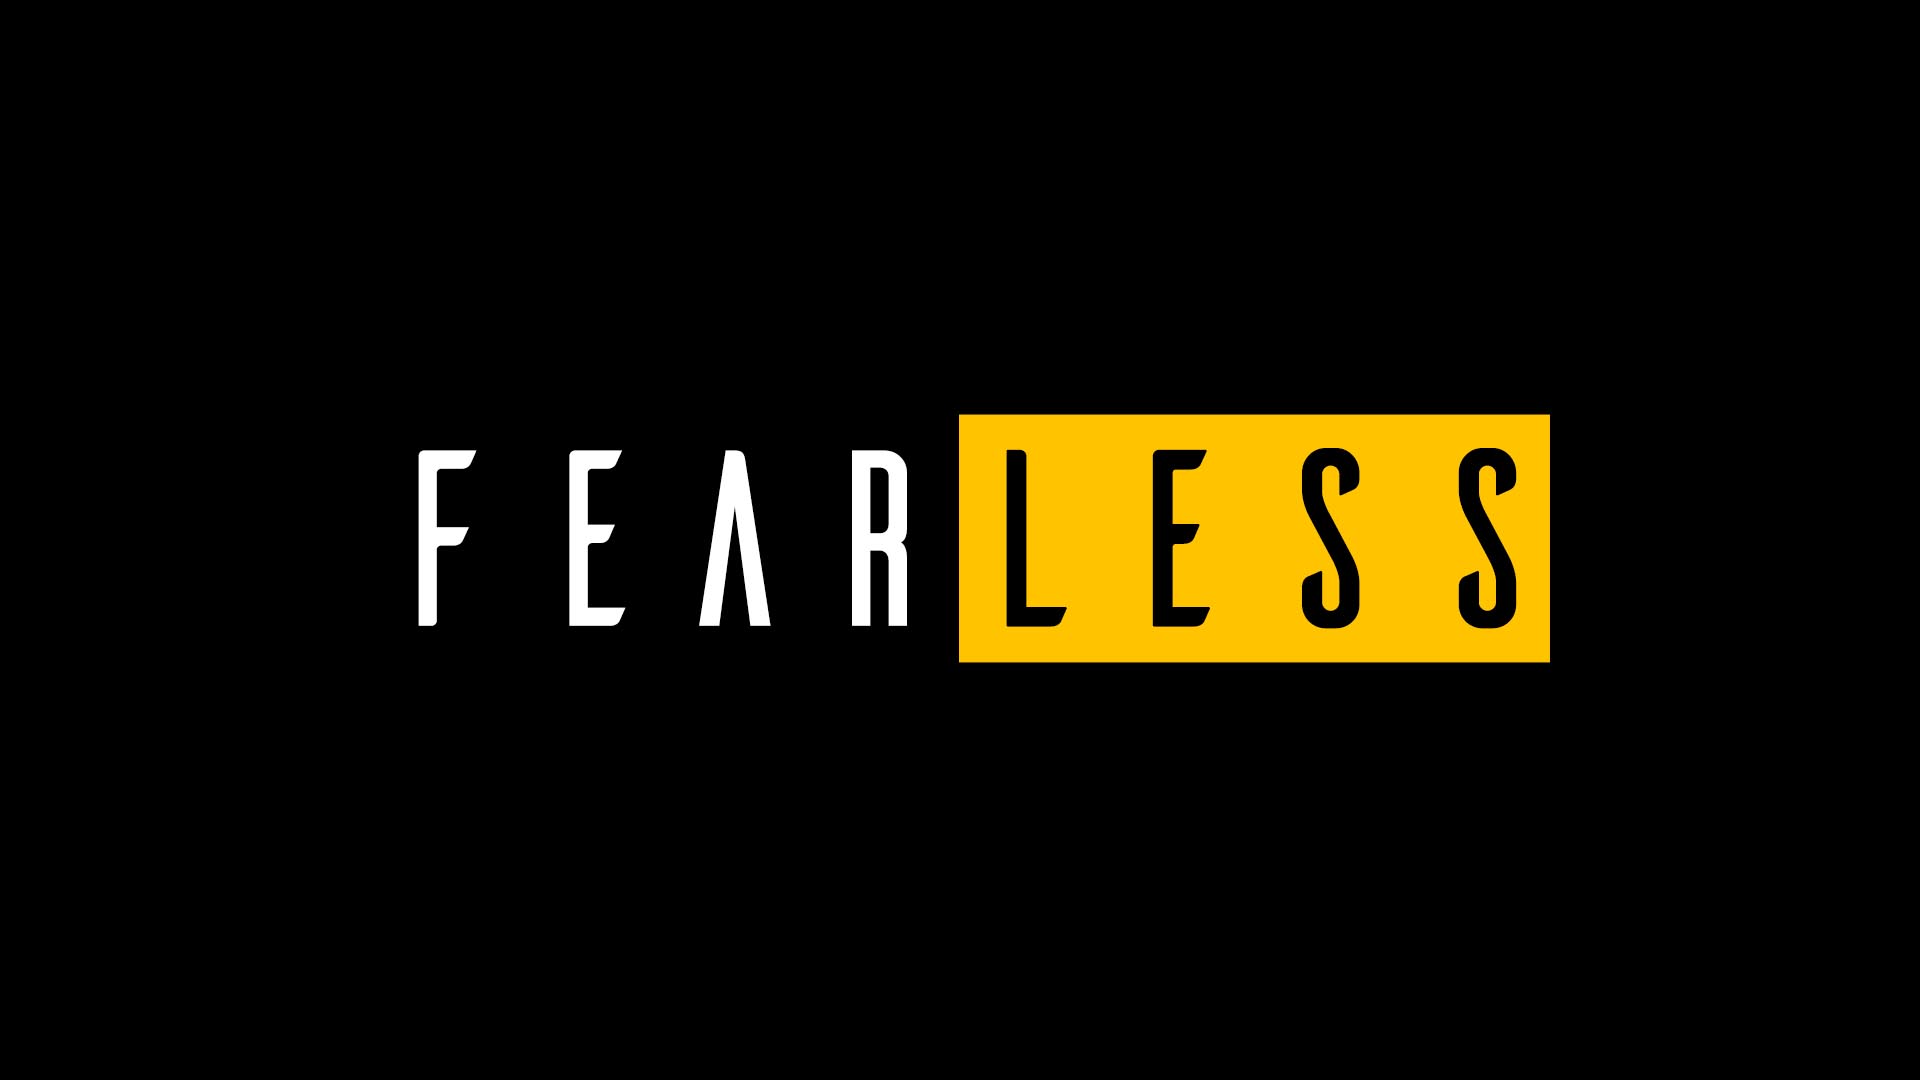 "Fear Less" Message Series